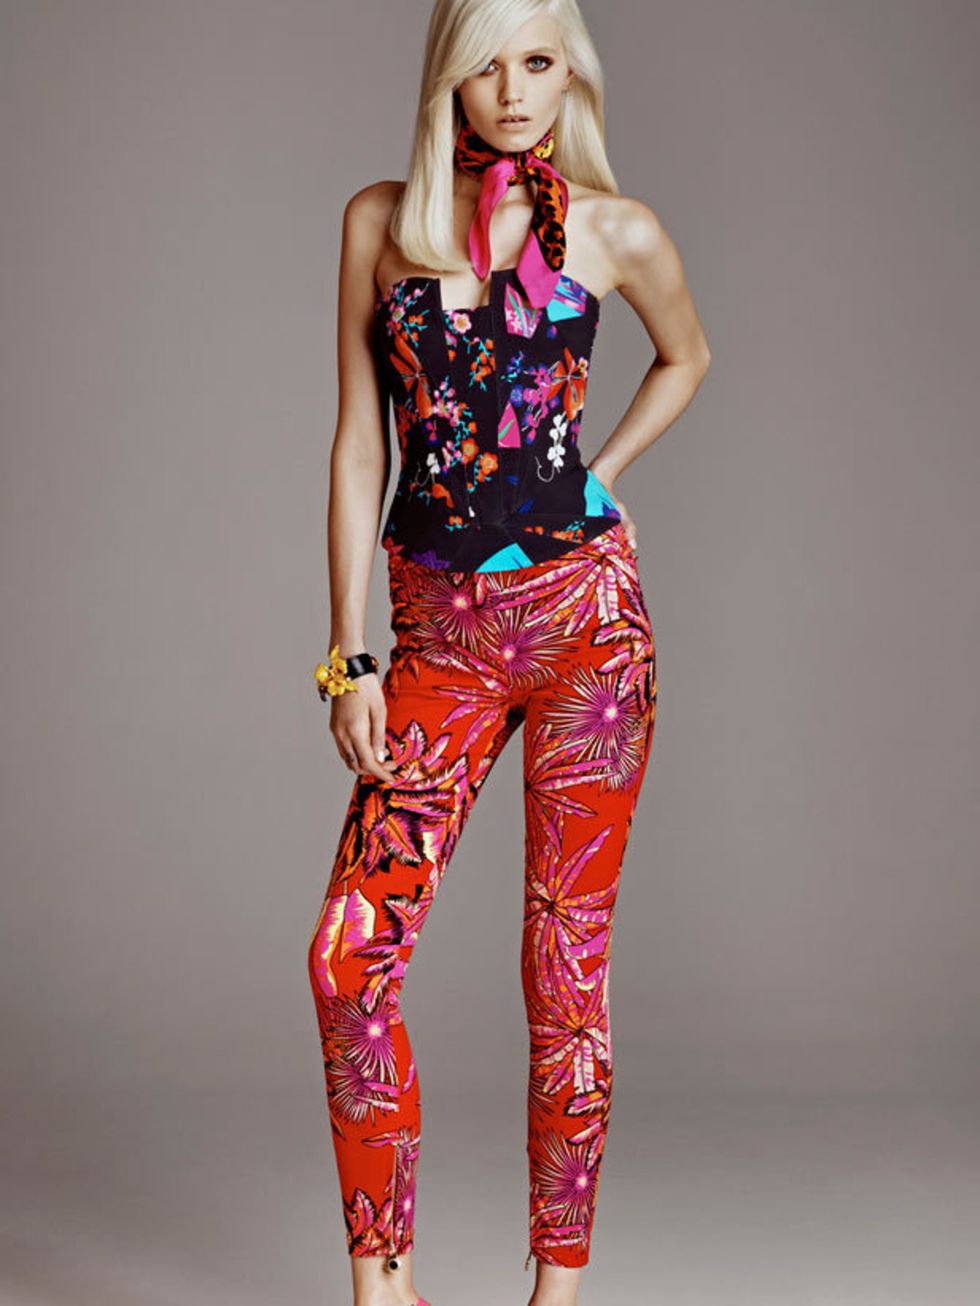 <p><a href="http://www.elleuk.com/content/search?SearchText=Abbey+Lee+Kershaw&amp;SearchButton=Search">Abbey Lee Kershaw</a> wearing top-to-toe prints in the <a href="http://www.elleuk.com/catwalk/collections/versace/">Versace</a> for <a href="http://www.